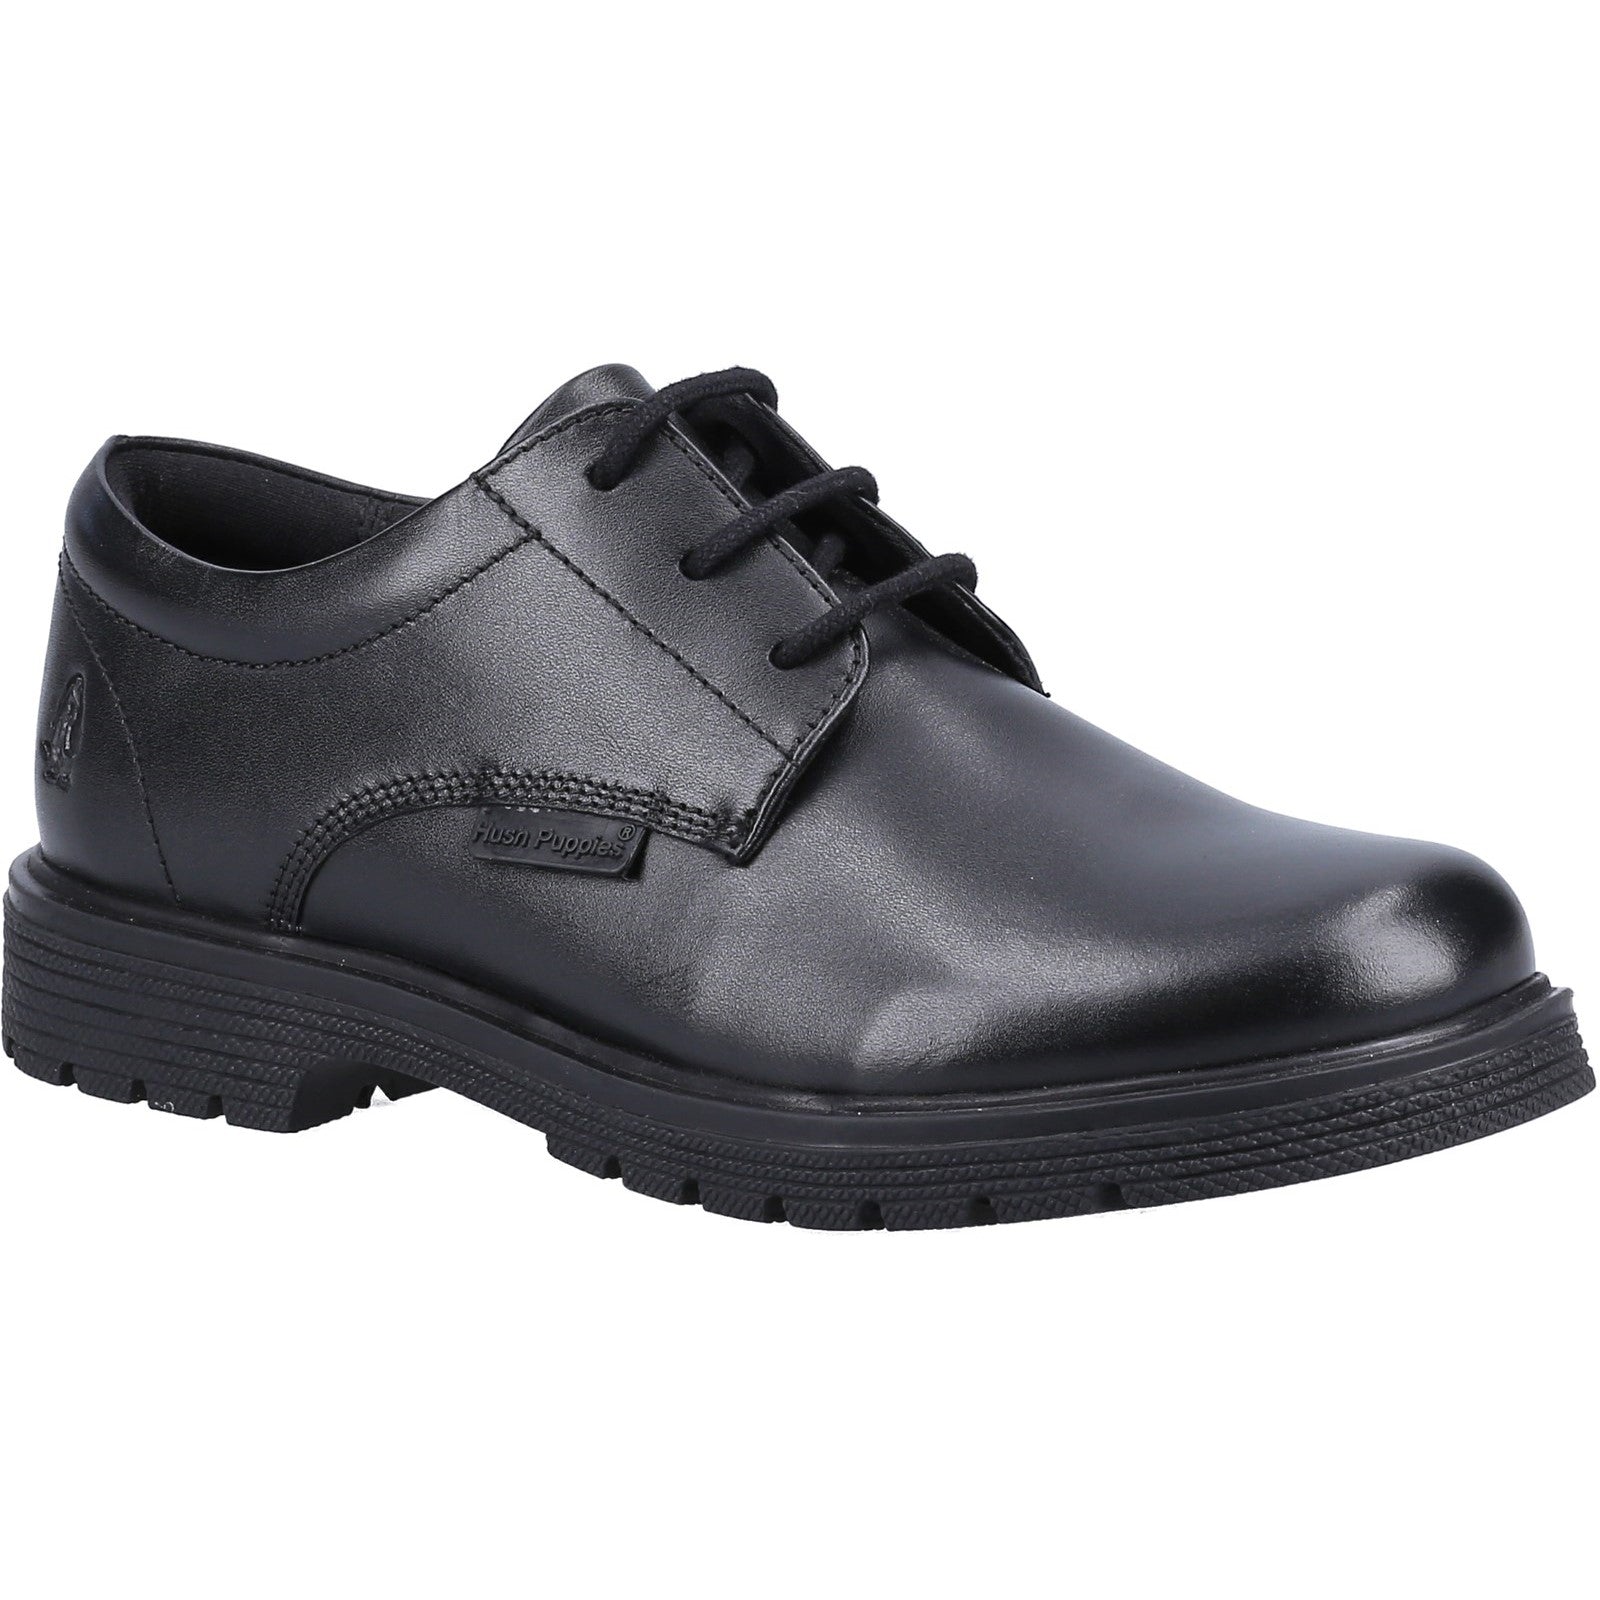 Hush Puppies Girls Polly Leather School Shoes - Black